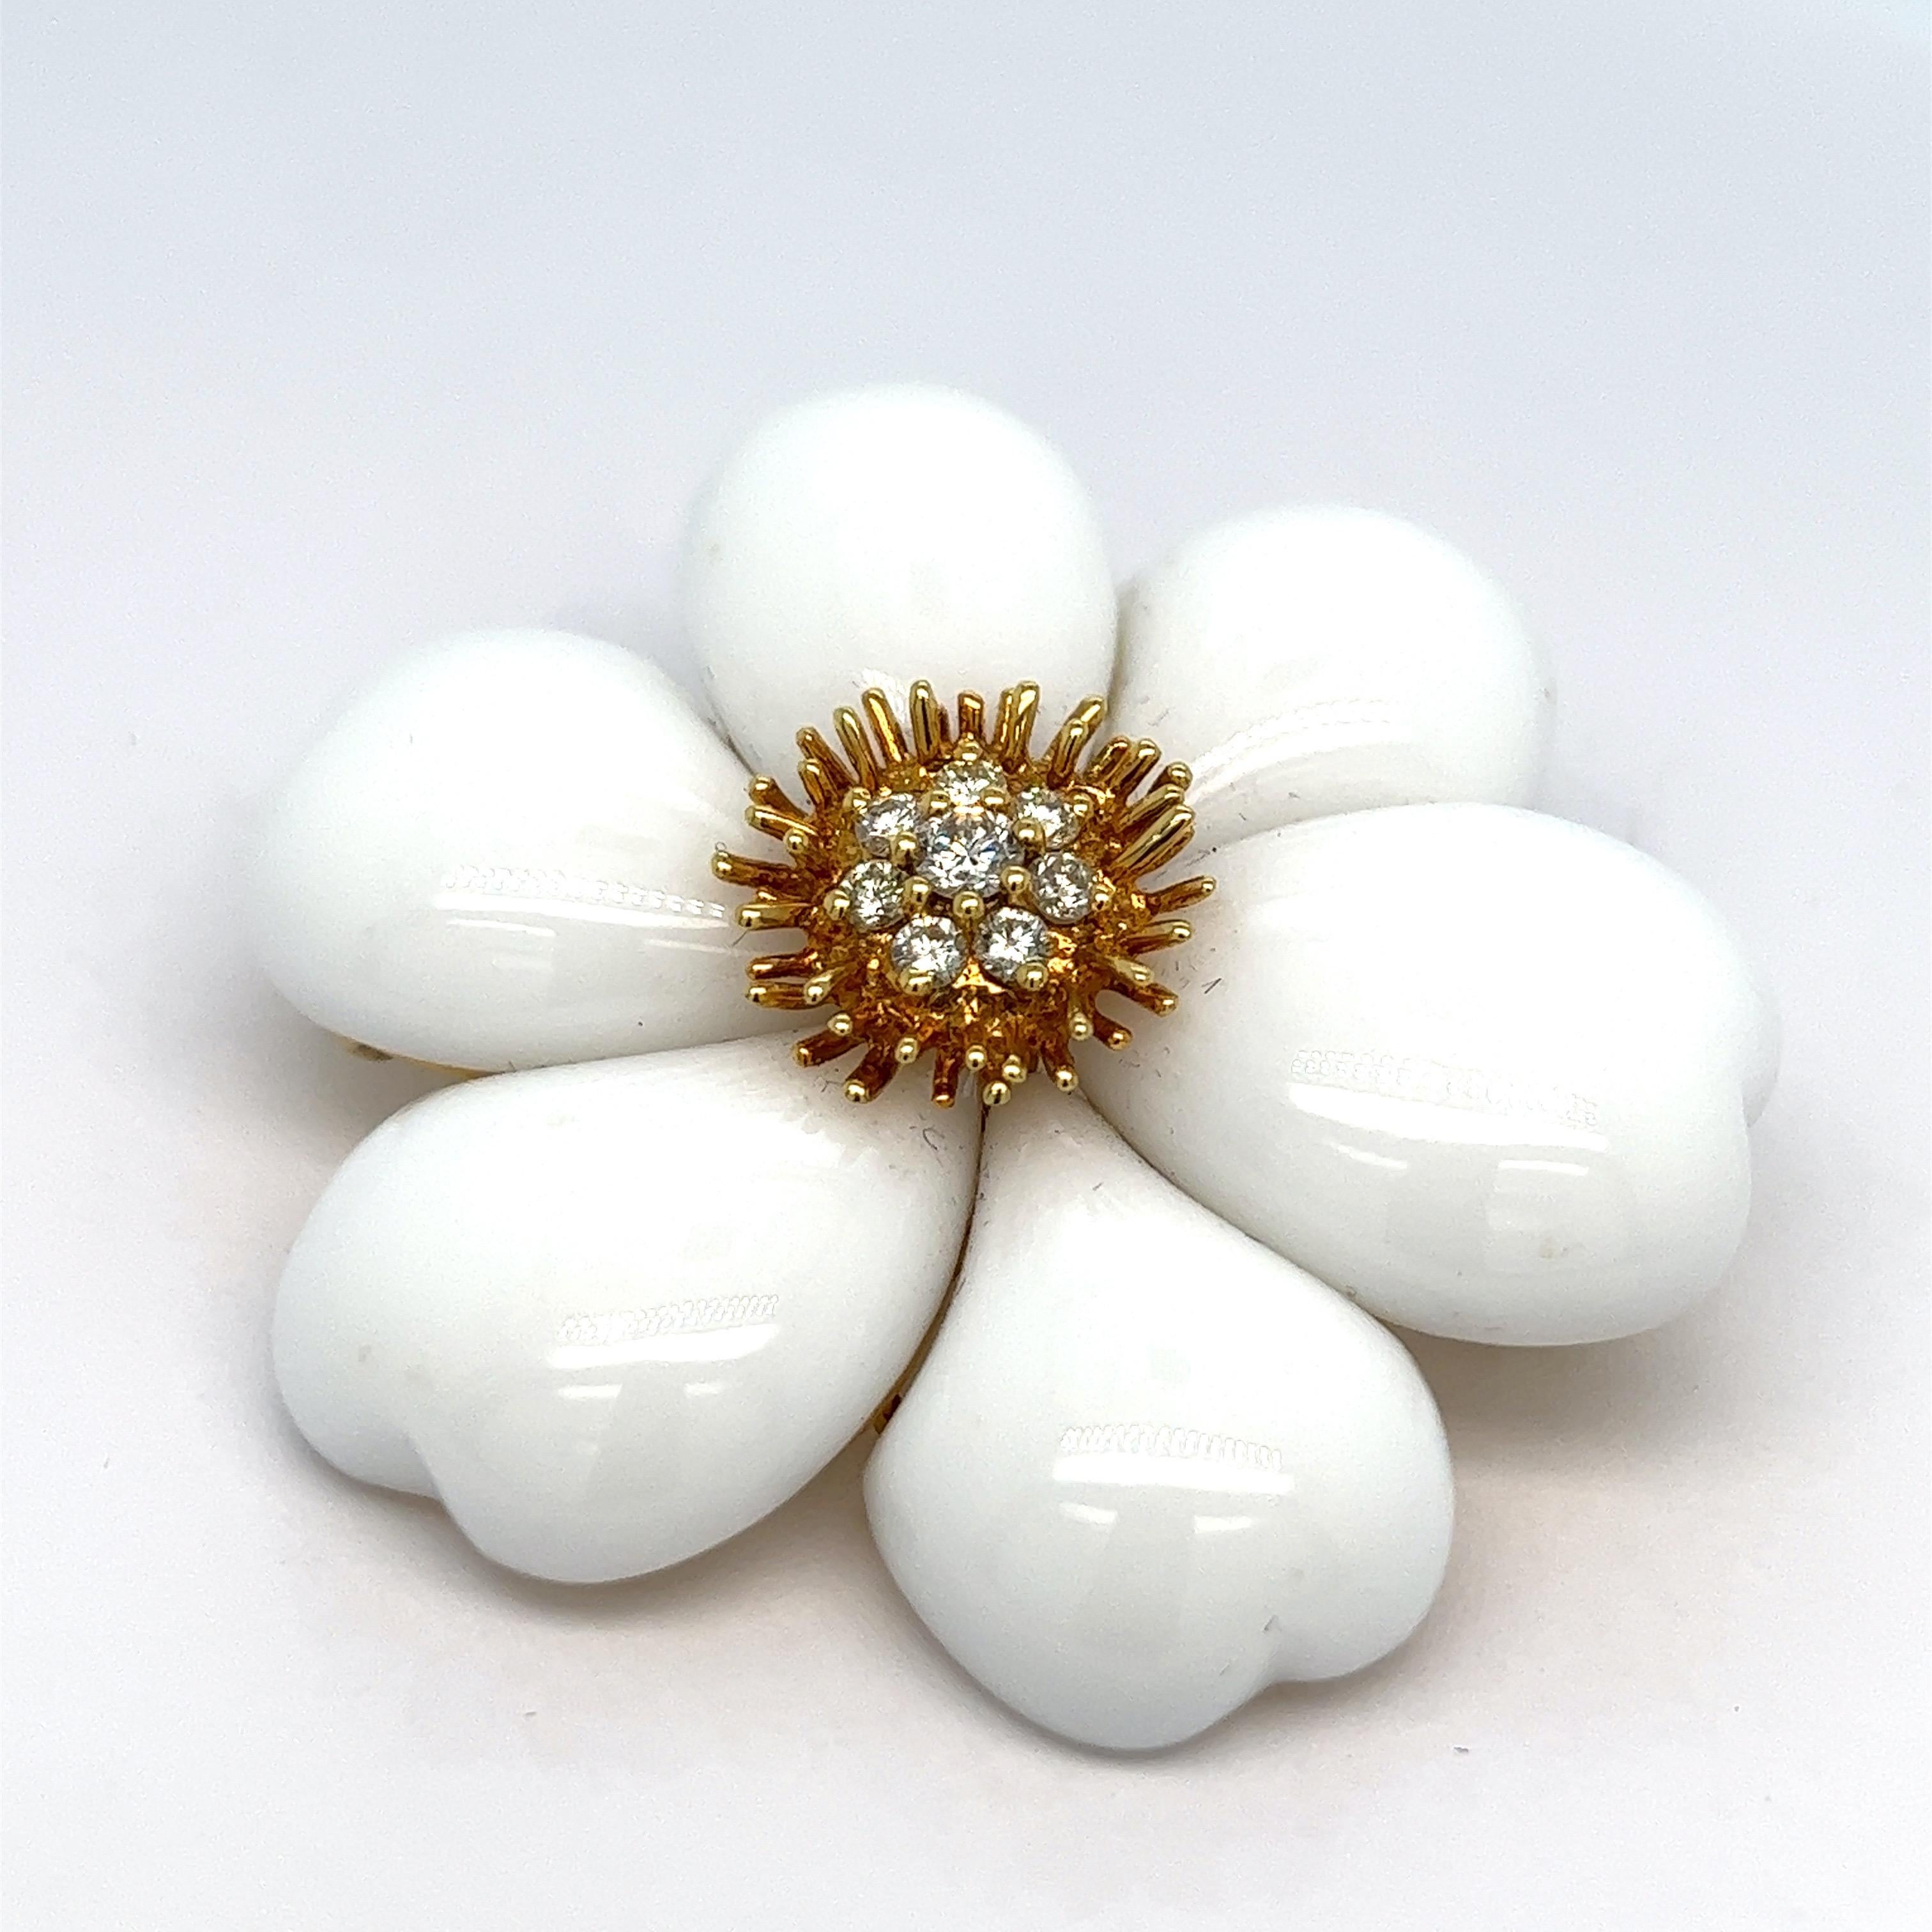 White coral diamond flower brooch

Round-cut diamonds of approximately 0.50 carat, six petals of white coral 

Size: width 2 inches, length 1.88 inches
Total weight: 32.3 grams 